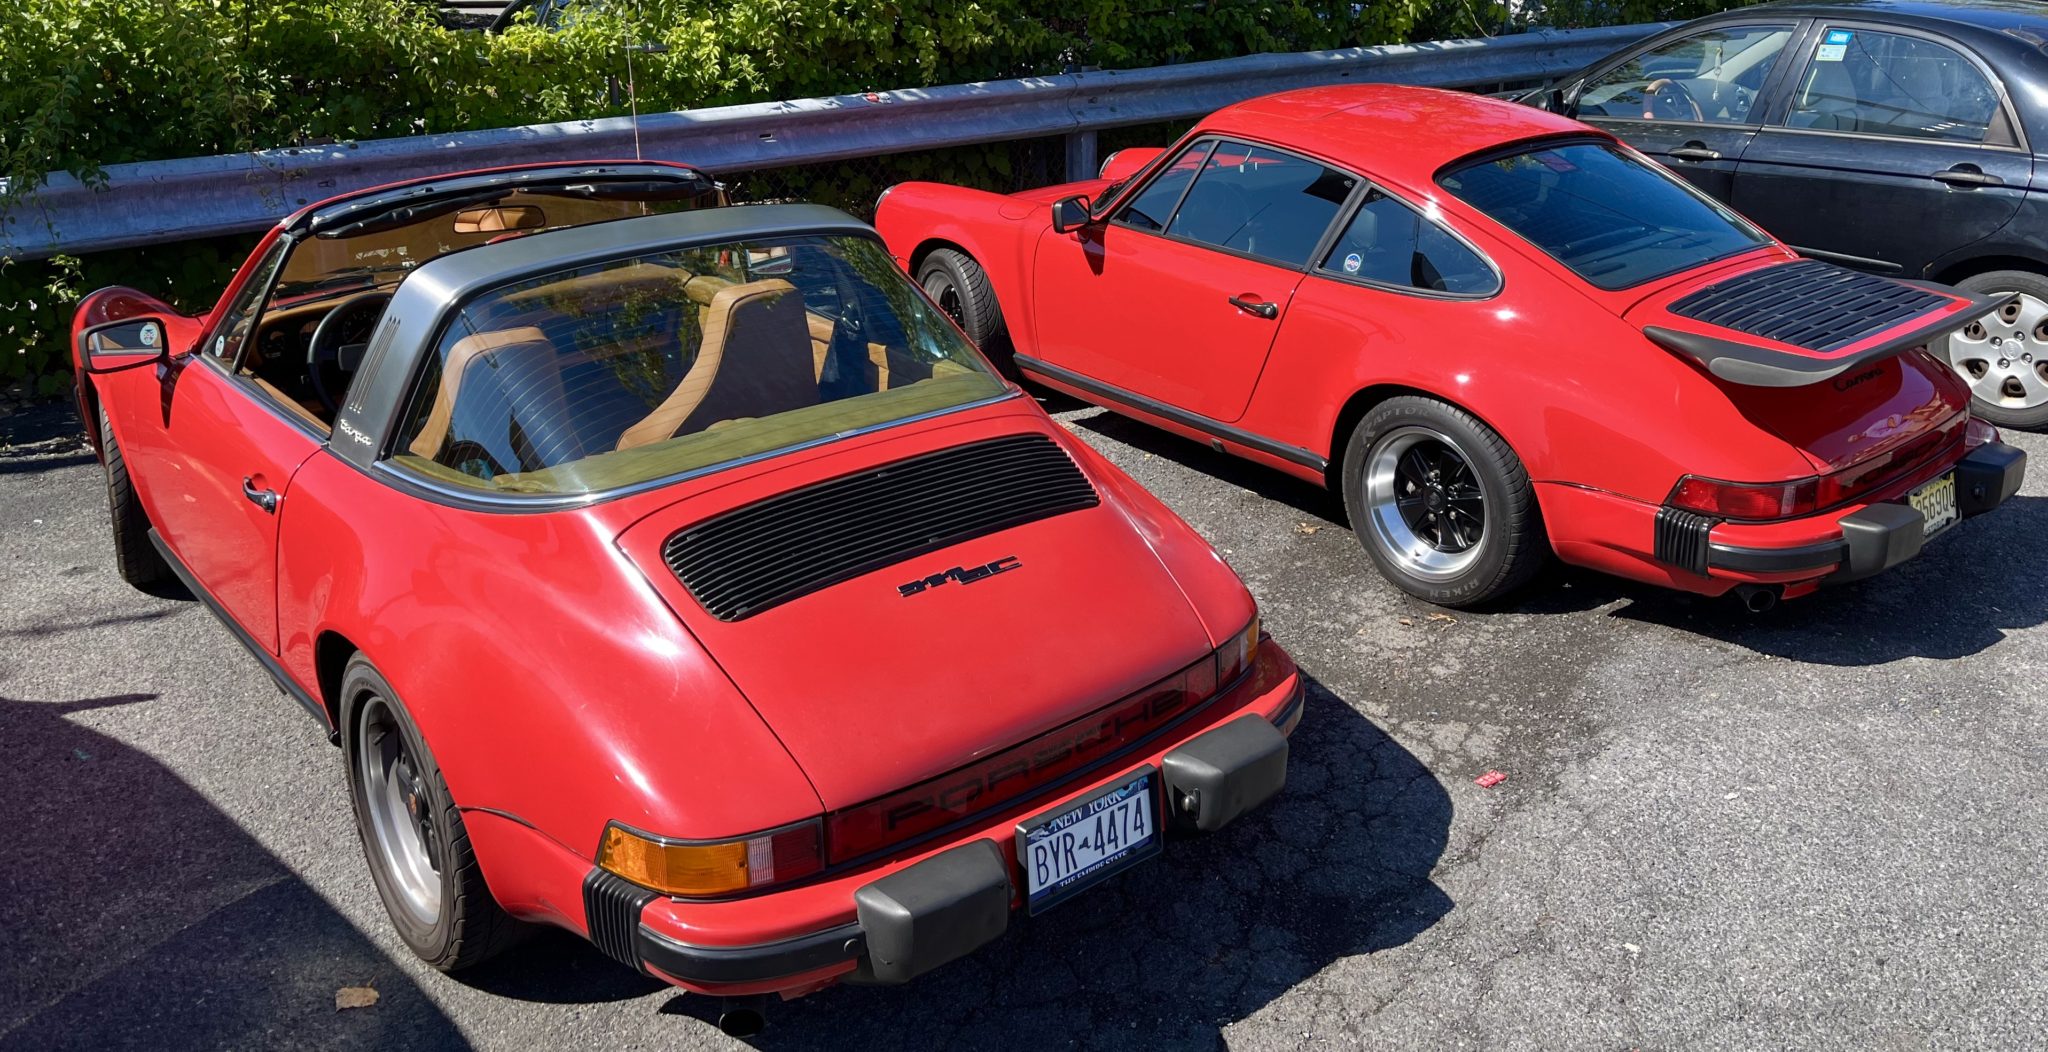 We spoke to owners of the 1979 911 Targa (left) and the 1986 911 (right) shown here.